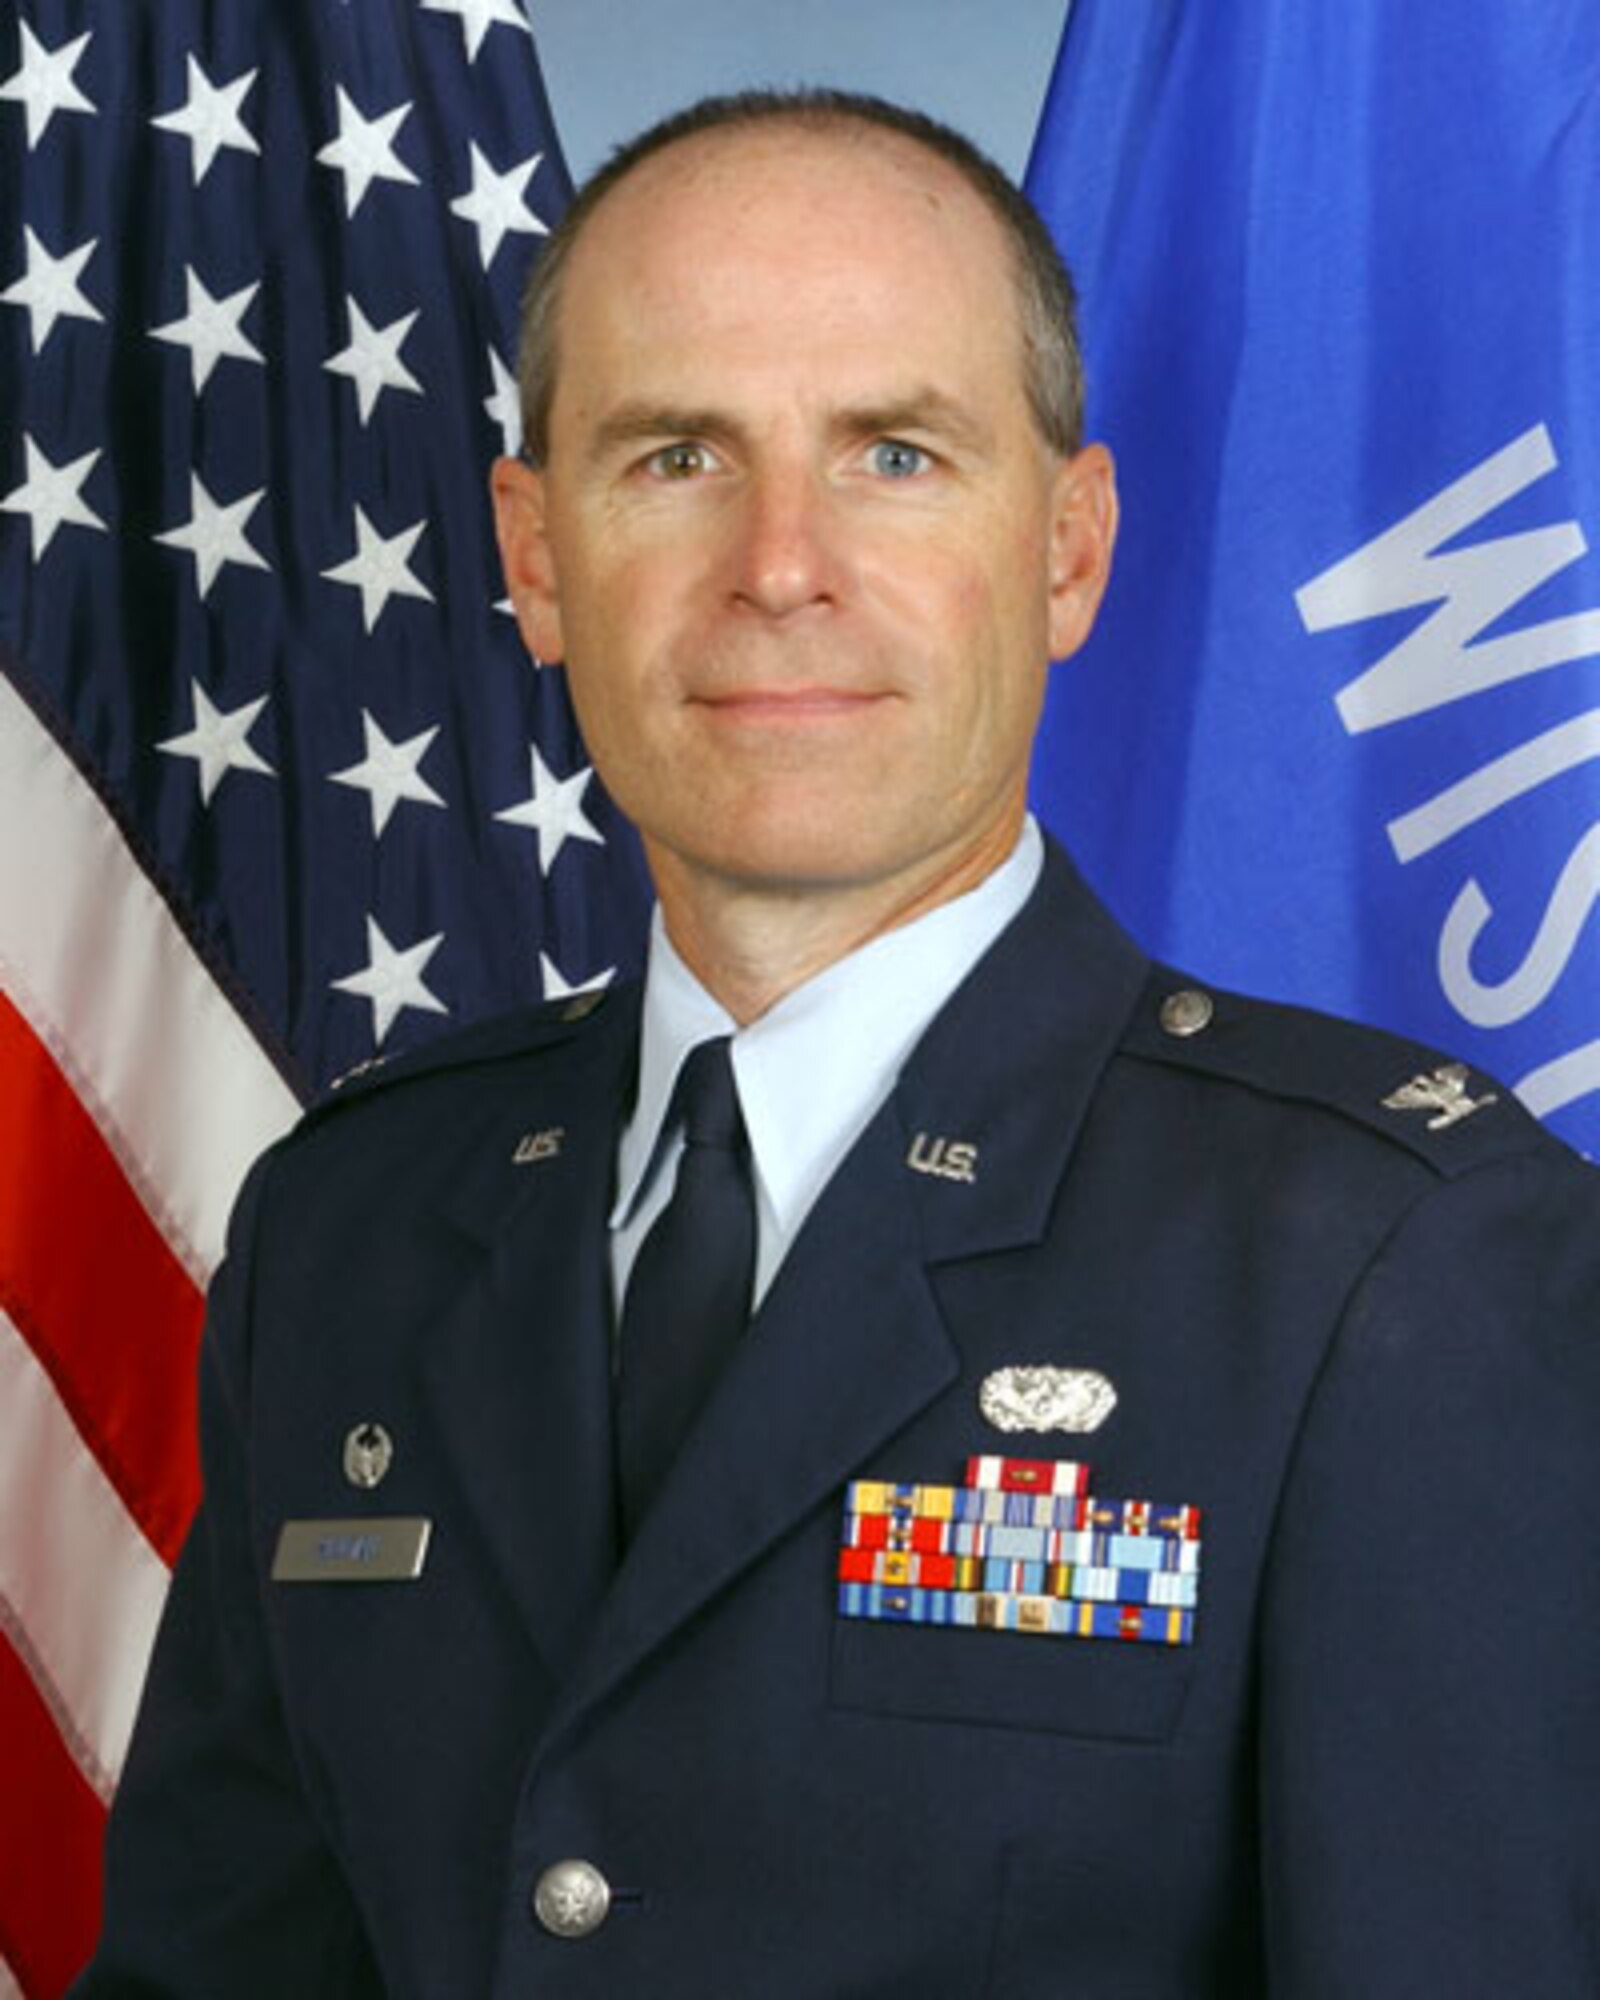 Col Michael Hinman was named Administrator of Wisconsin Emergency Management on June 10, 2010, and will retire from his duties as Vice Wing Commander of the 115th Fighter Wing.